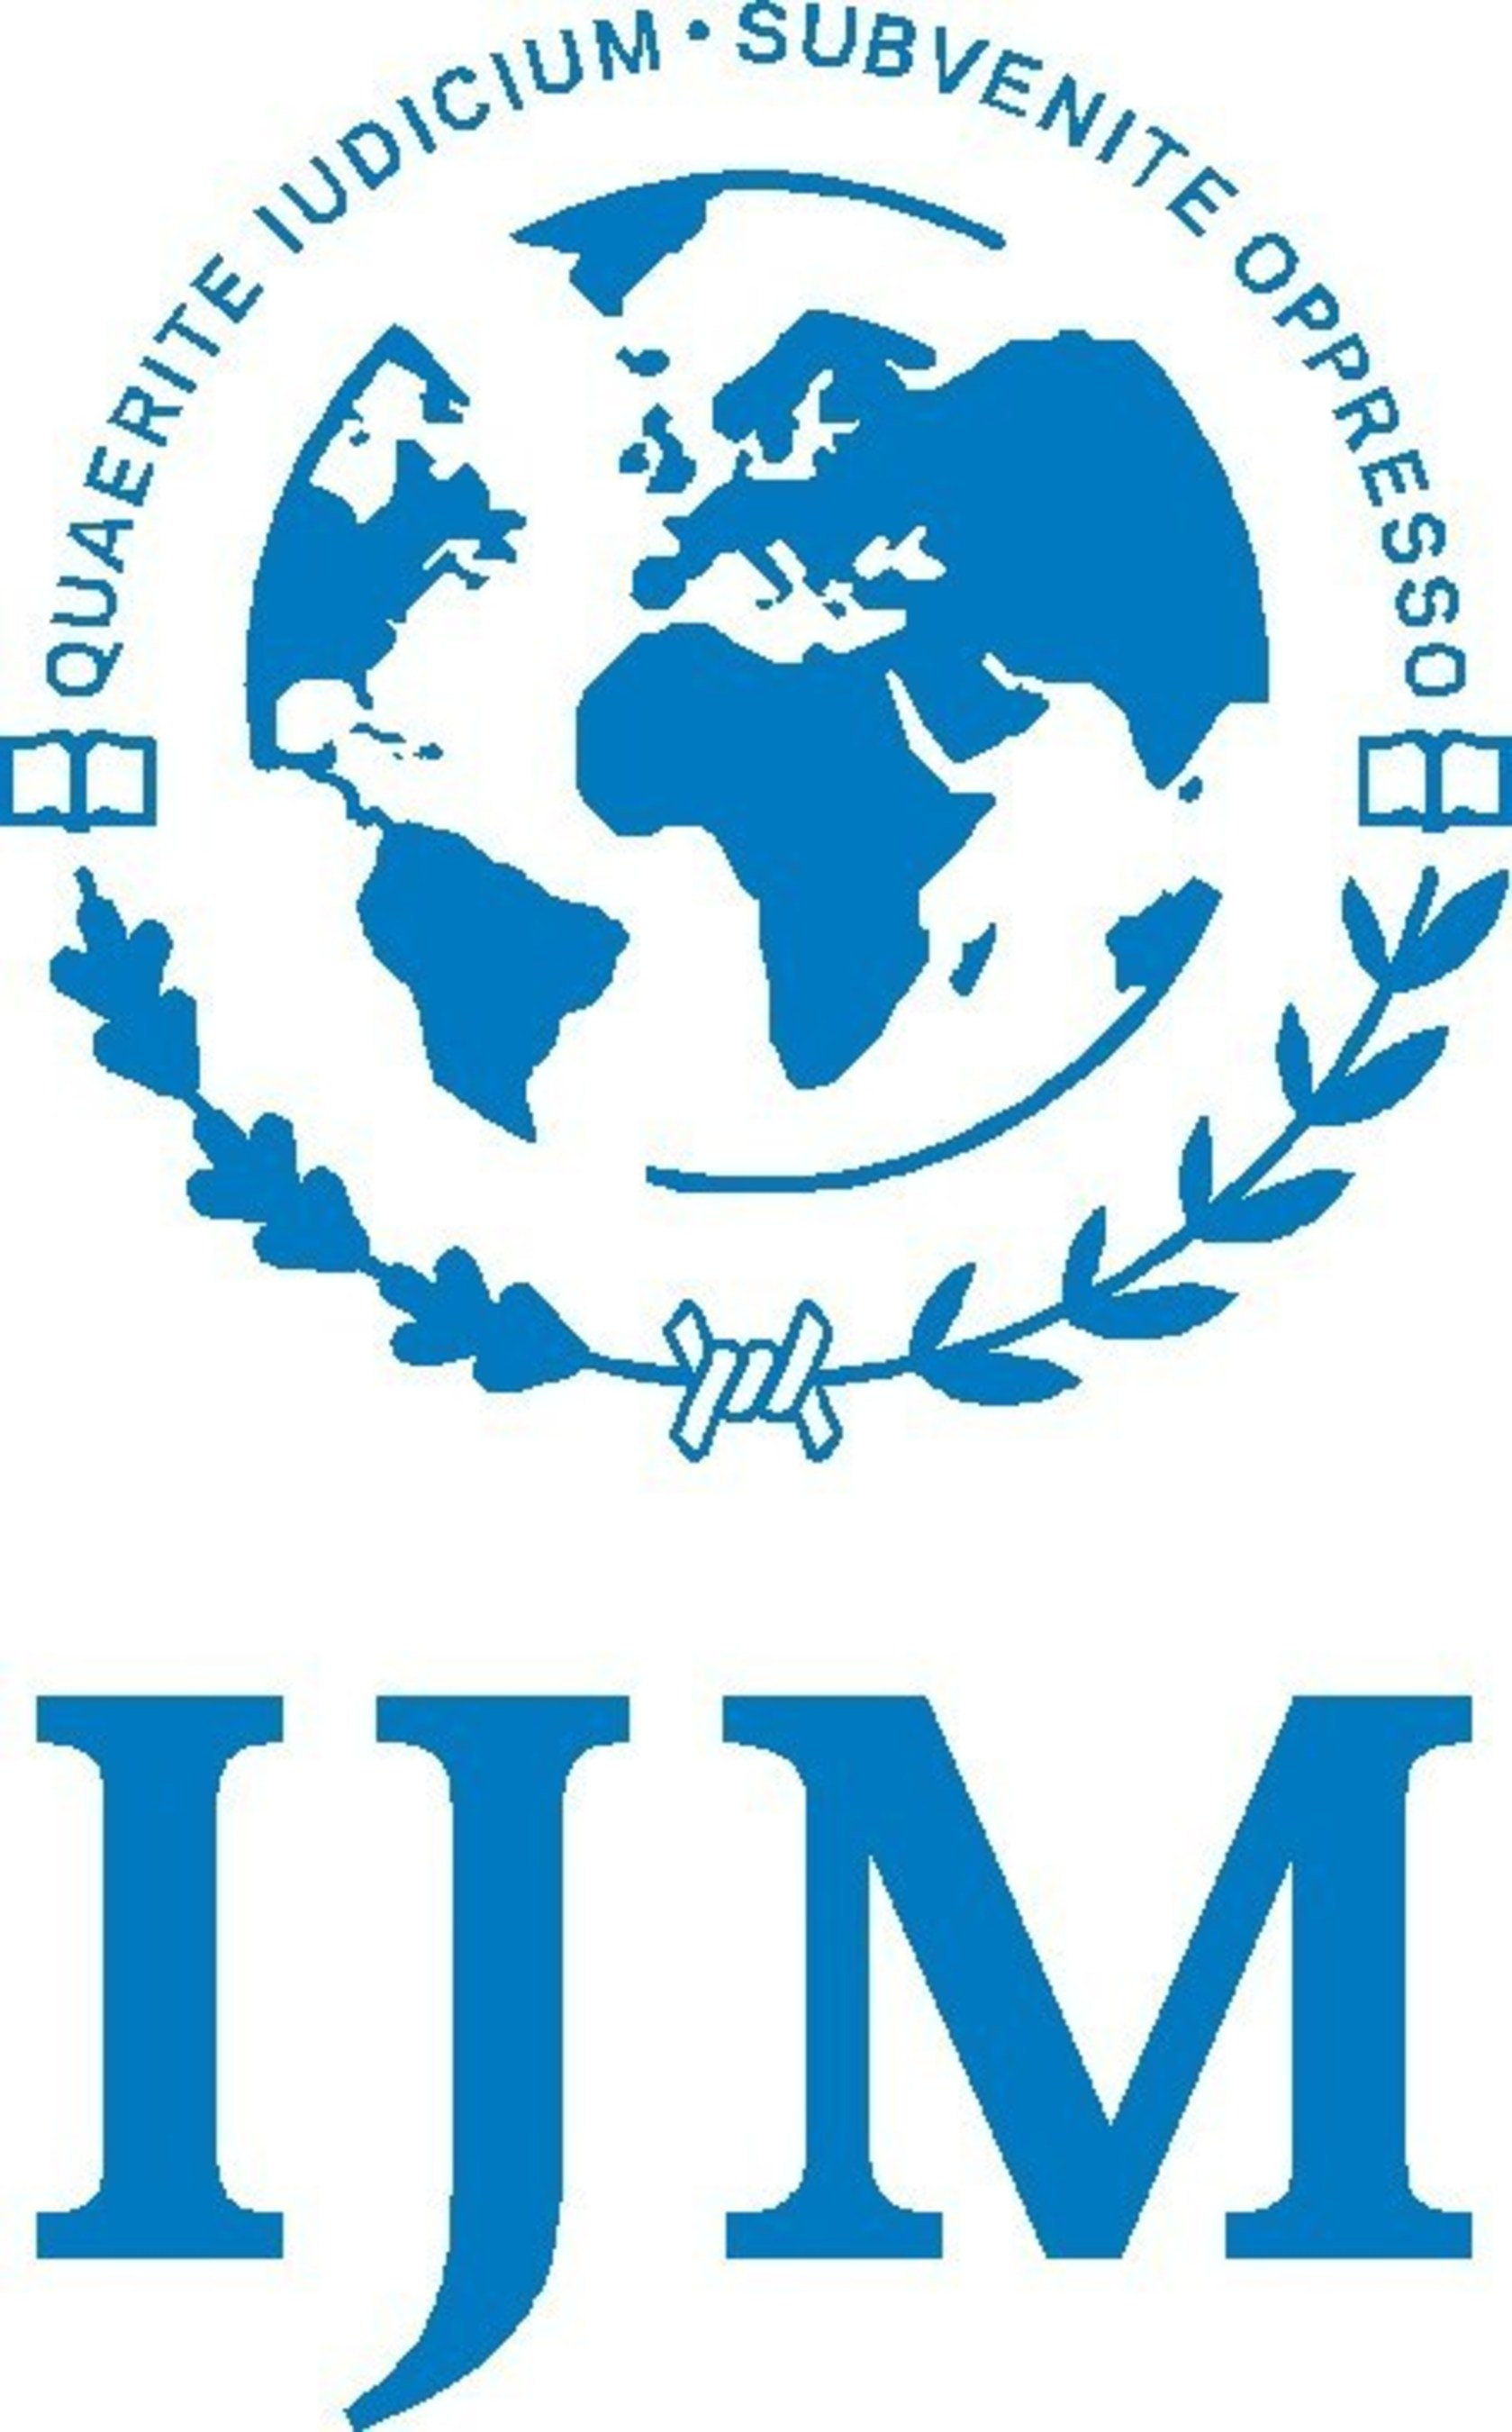 International Justice Mission is a global organization that protects the poor from violence throughout the developing world. IJM partners with local authorities to rescue victims of violence, bring criminals to justice, restore survivors, and strengthen justice systems.